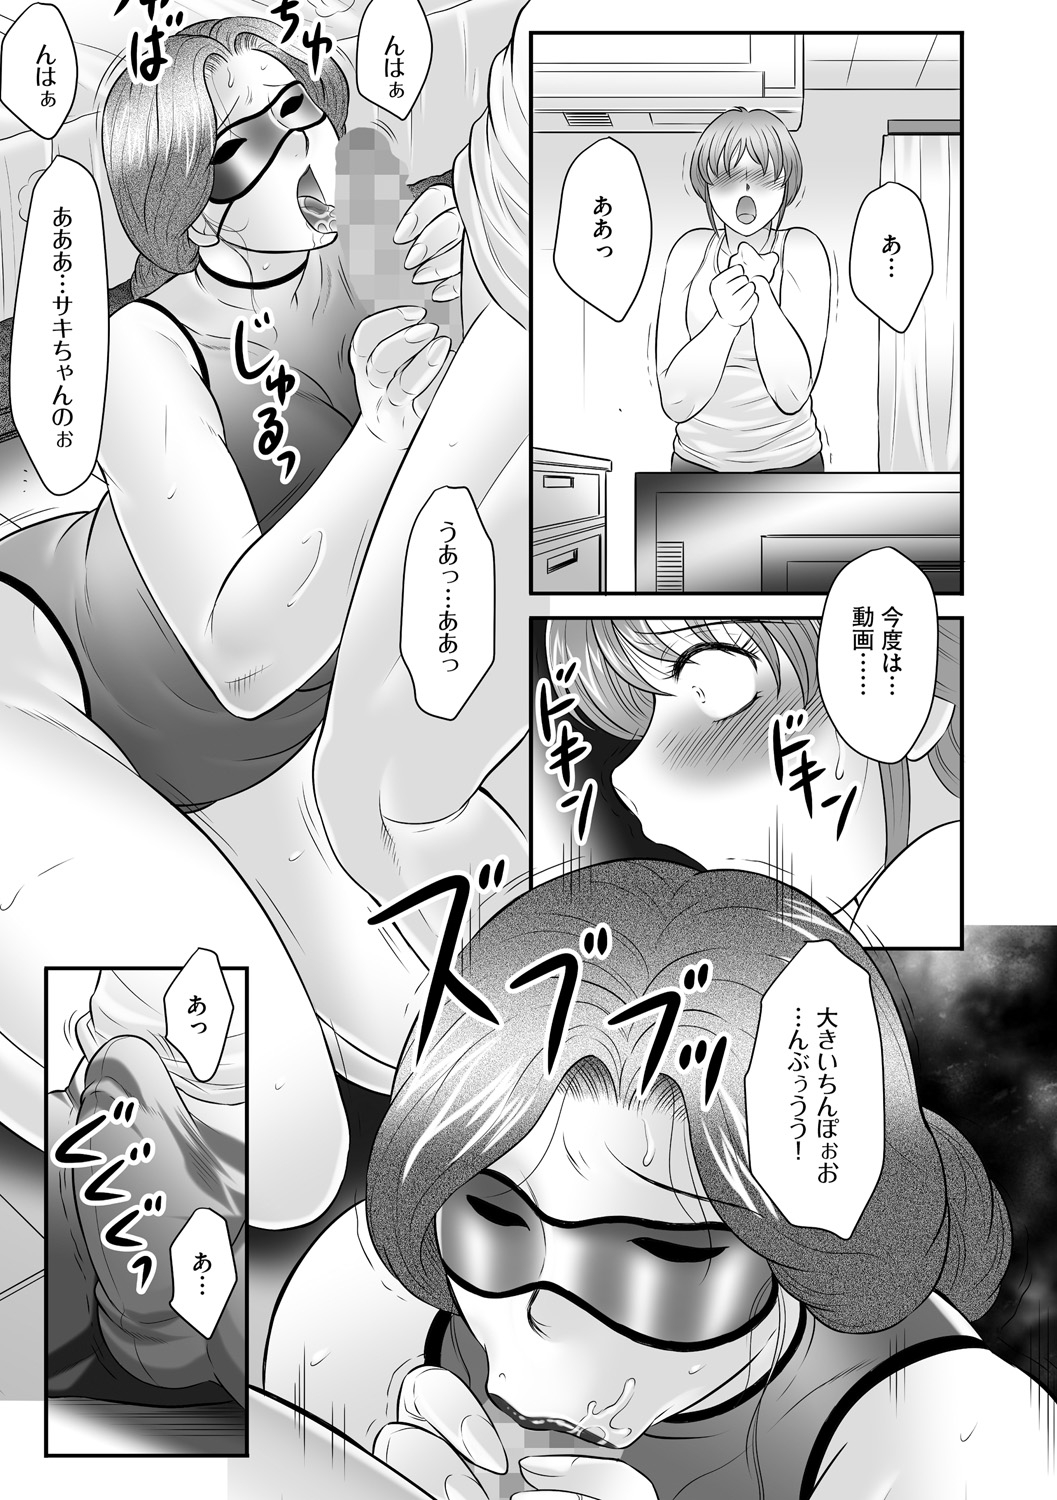 [Fuusen Club] Boshi no Susume - The advice of the mother and child Ch. 6 page 3 full